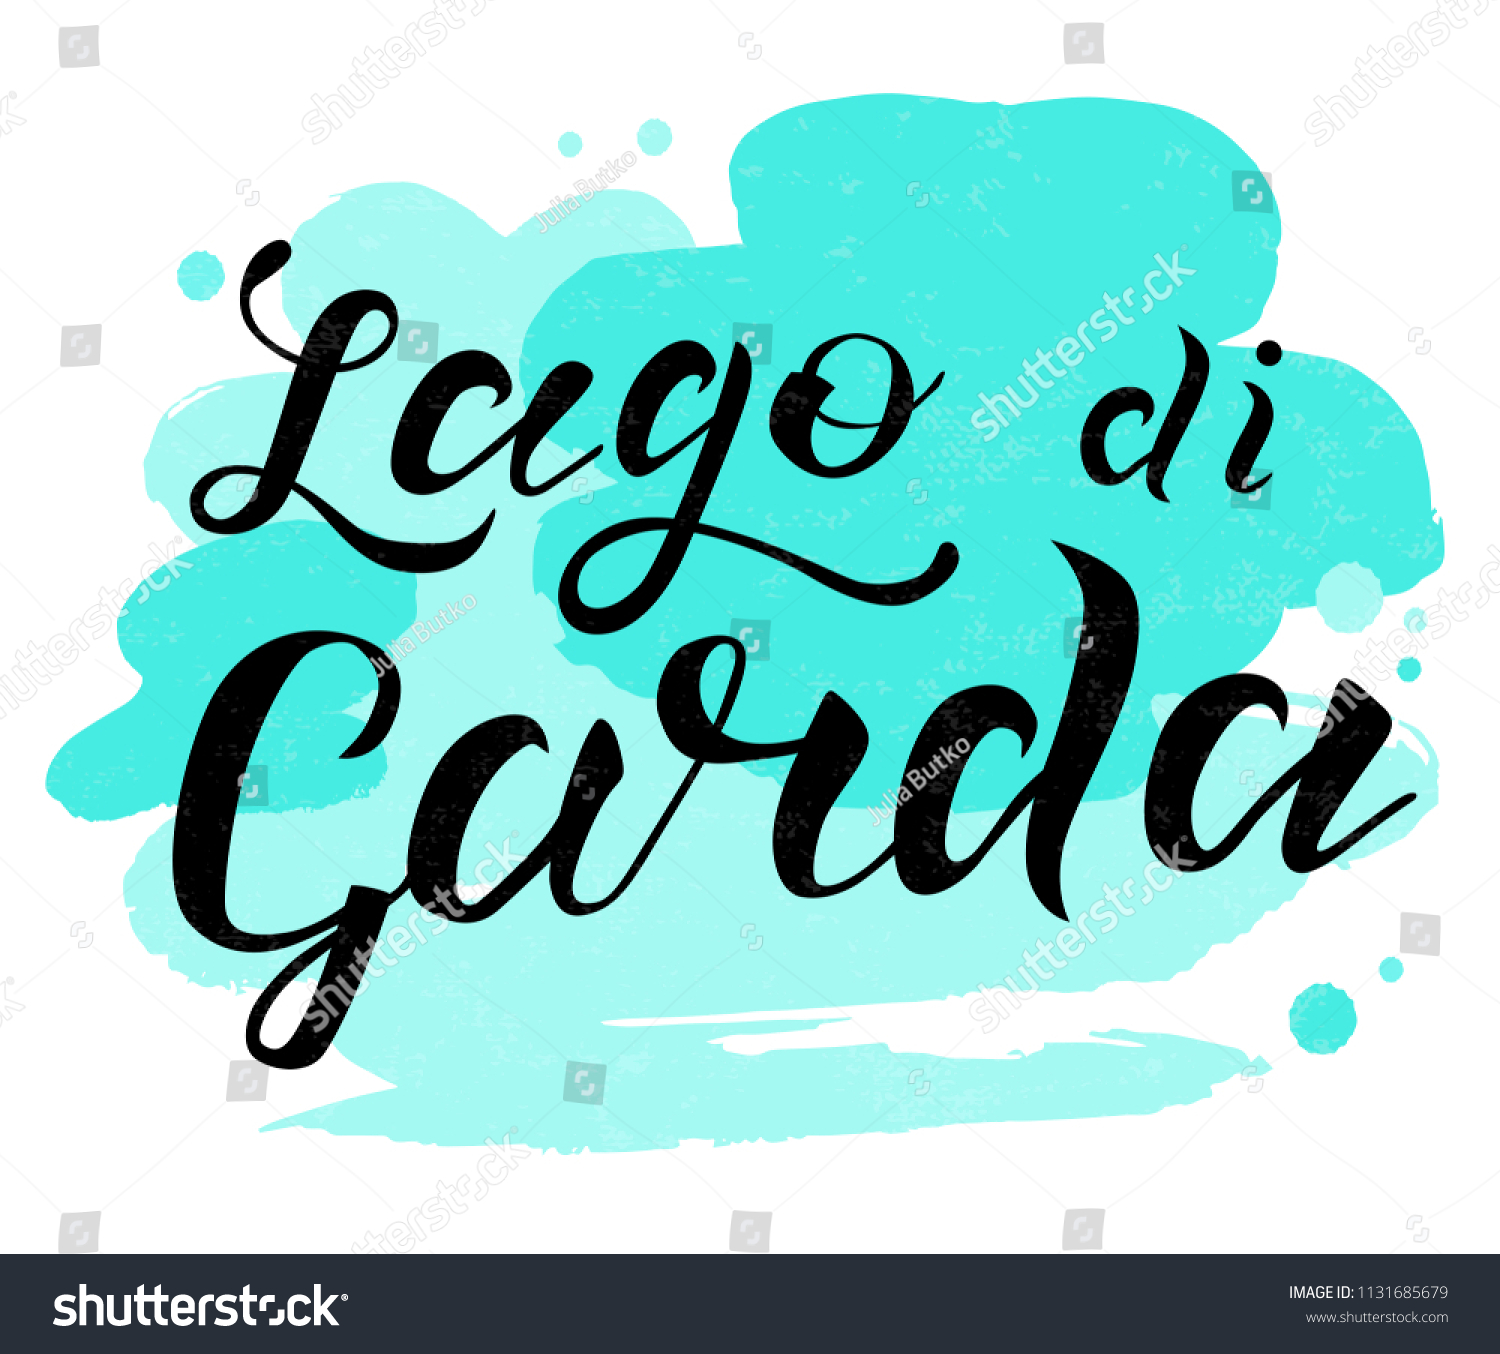 SVG of Hand lettering black text Lago di garda on white background with turquoise spots. Lake inf Italy. Modern calligraphy vector Illustration. Print for logo, travel, map, catalog, poster, blog, banner. svg